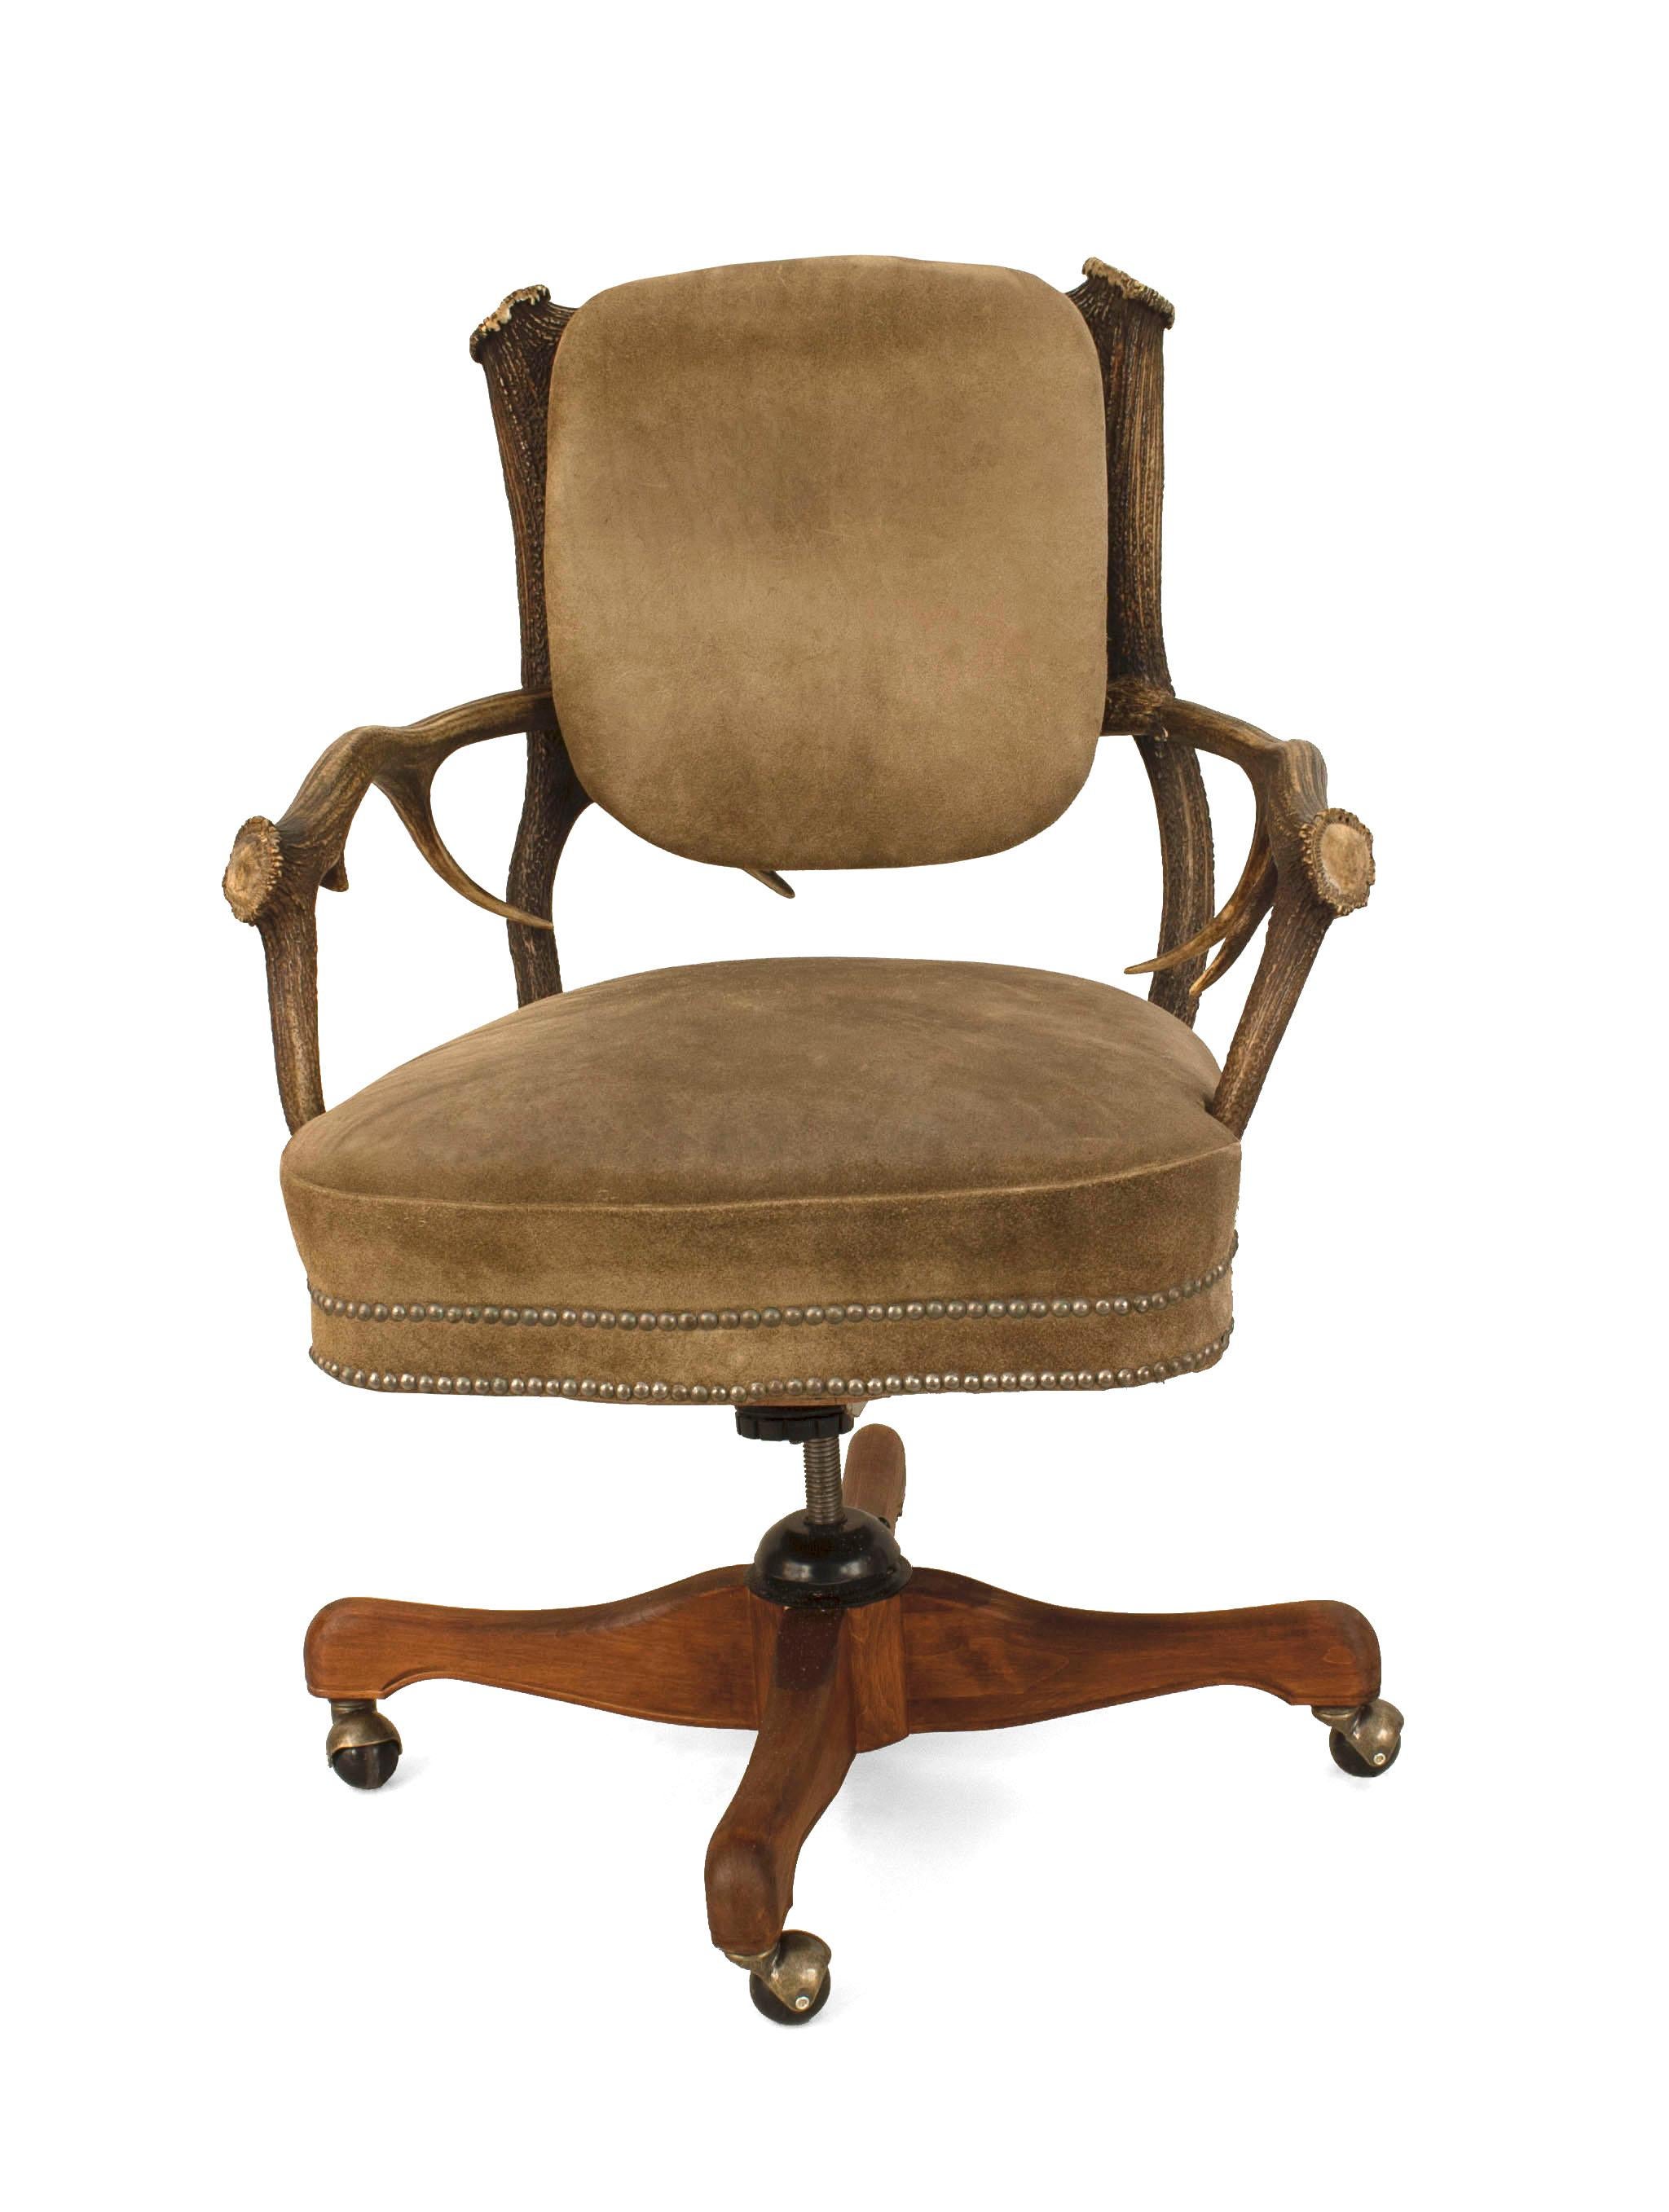 Rustic German horn and antler design (late 19th Century) swivel base arm chair with taupe suede upholstered seat and back.
